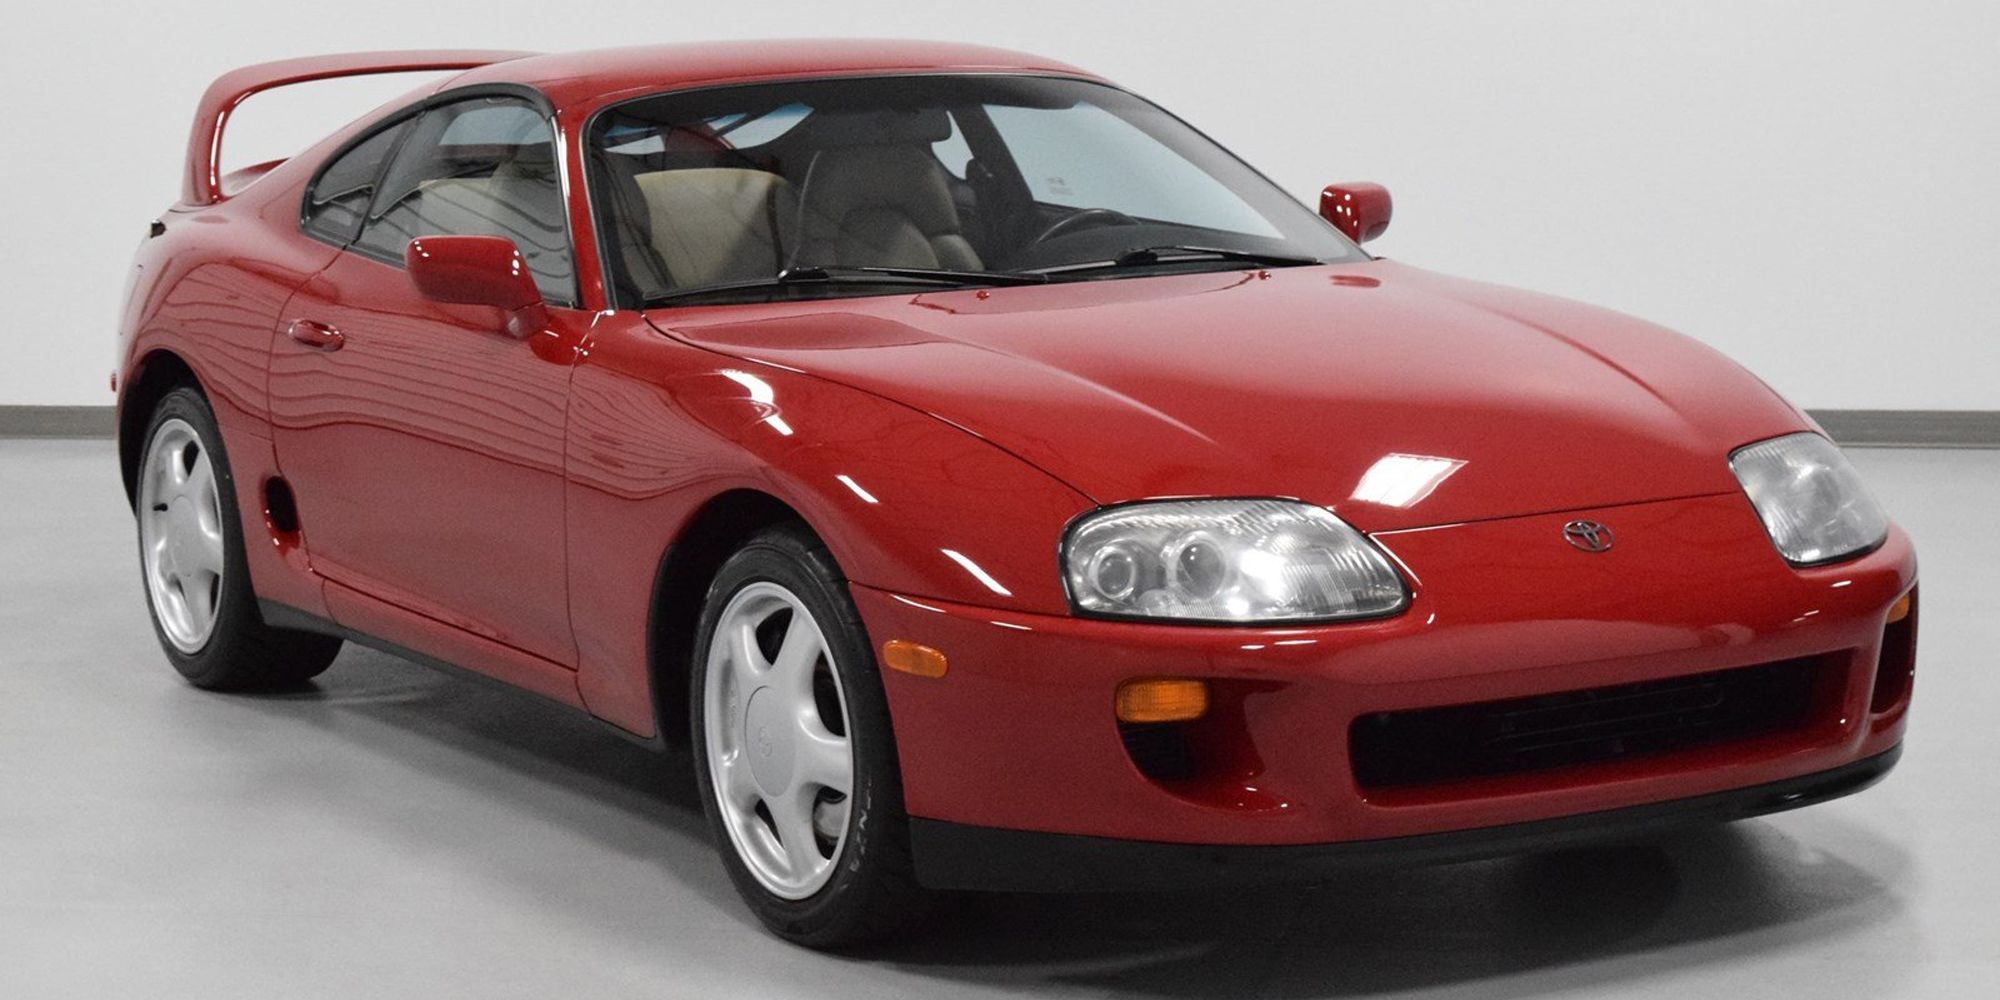 A mint condition Mk4 Supra in red